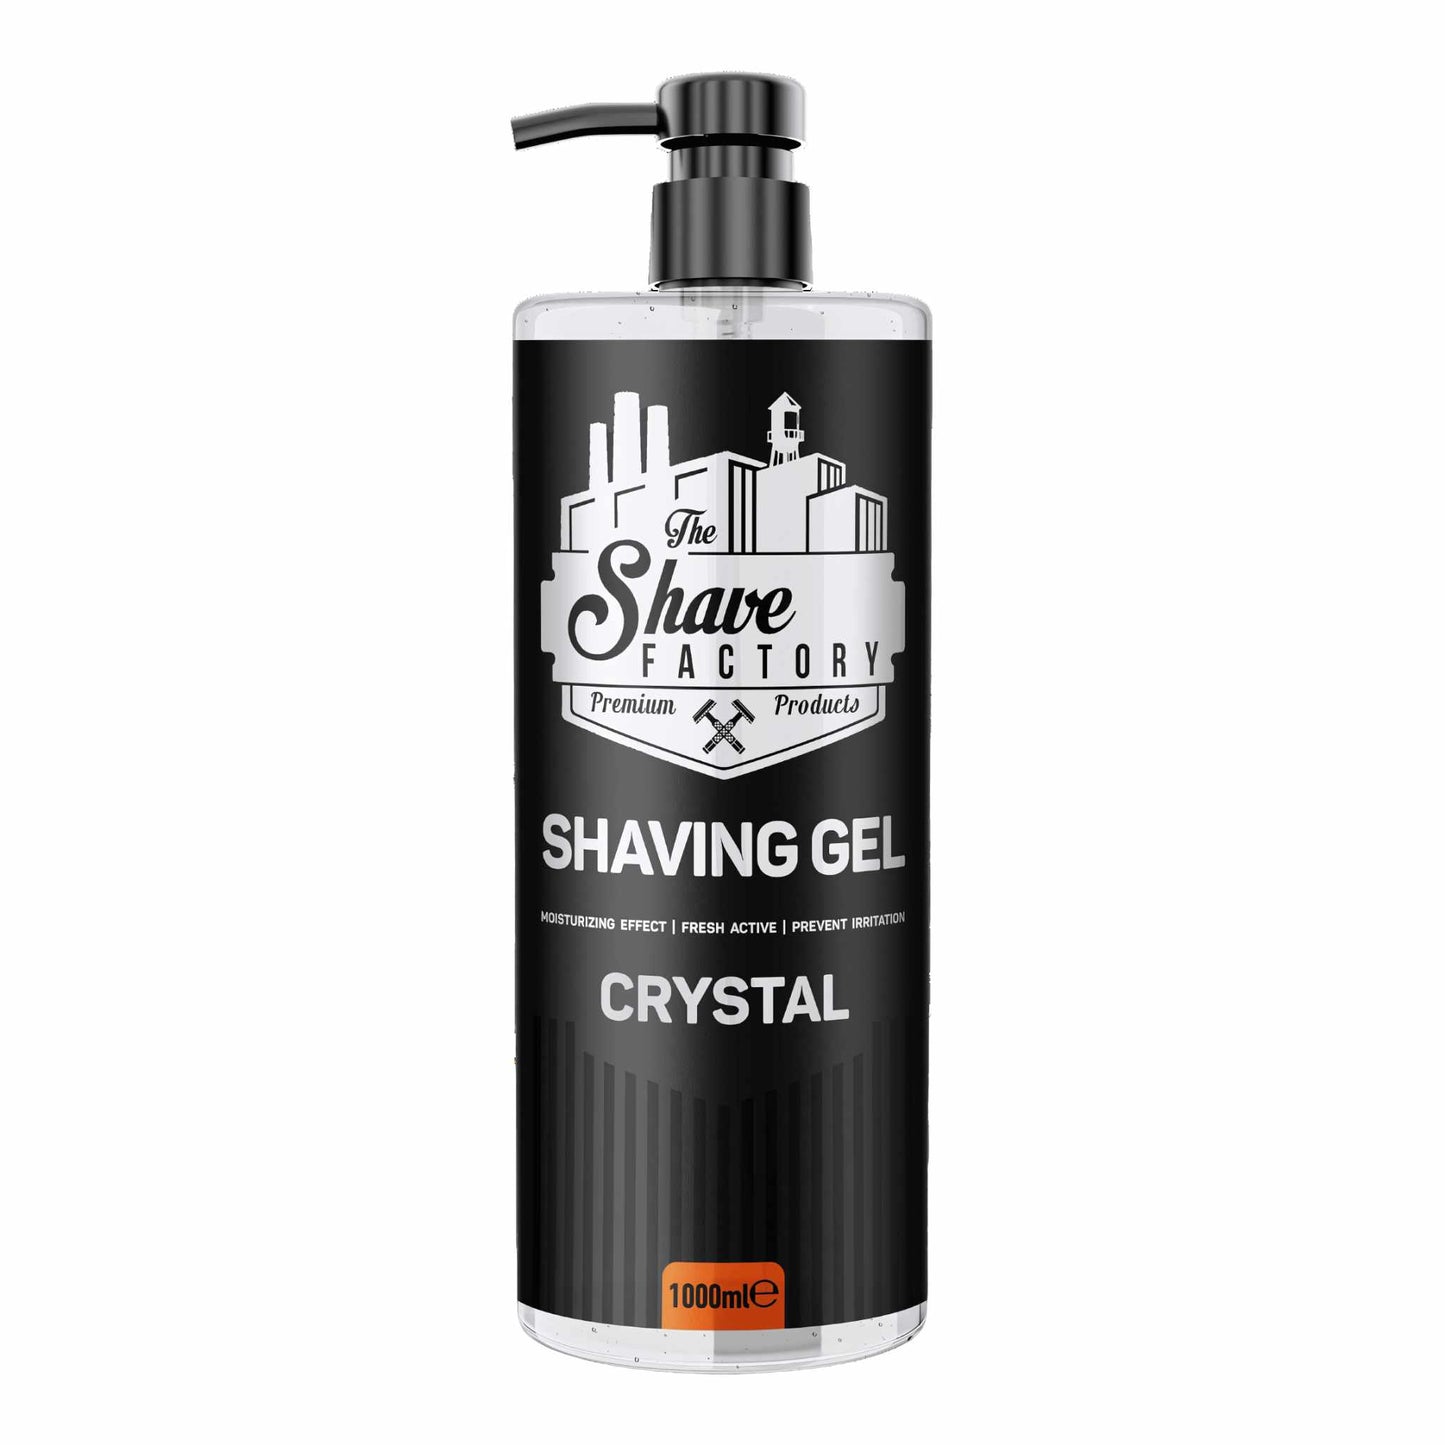 The Shave Factory Shaving Gel Crystal 1000 ml